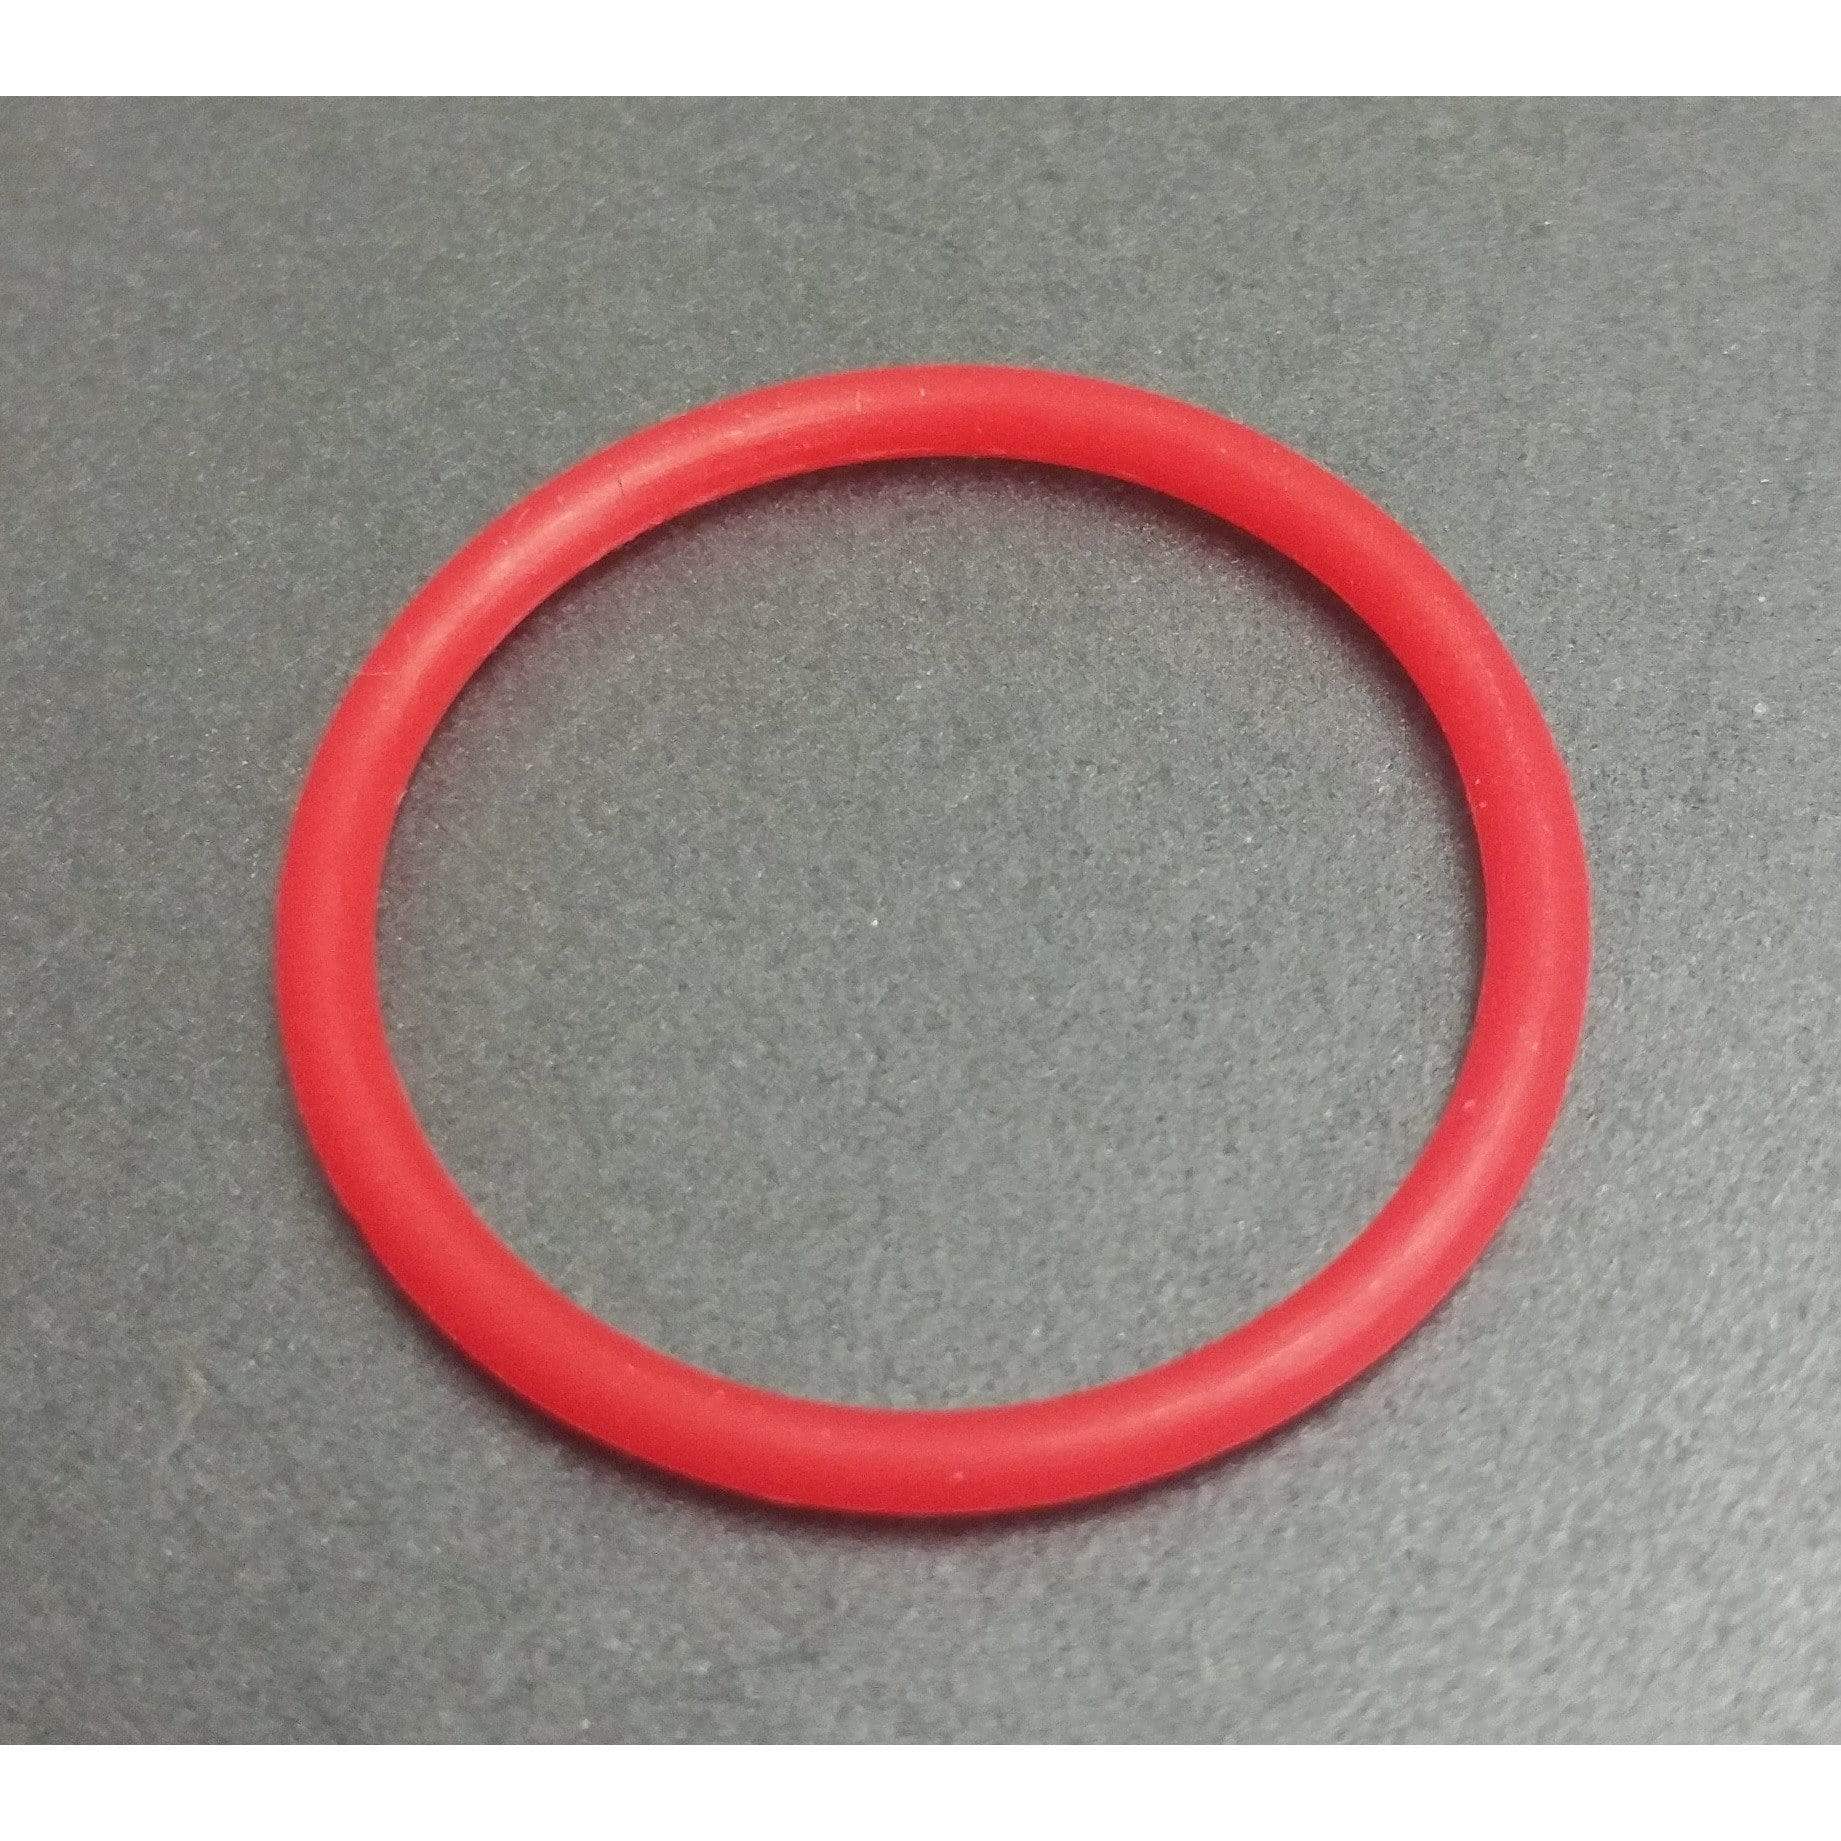 TFV12 Replacement Seals Top Glass Oring Red Seals/Oring's